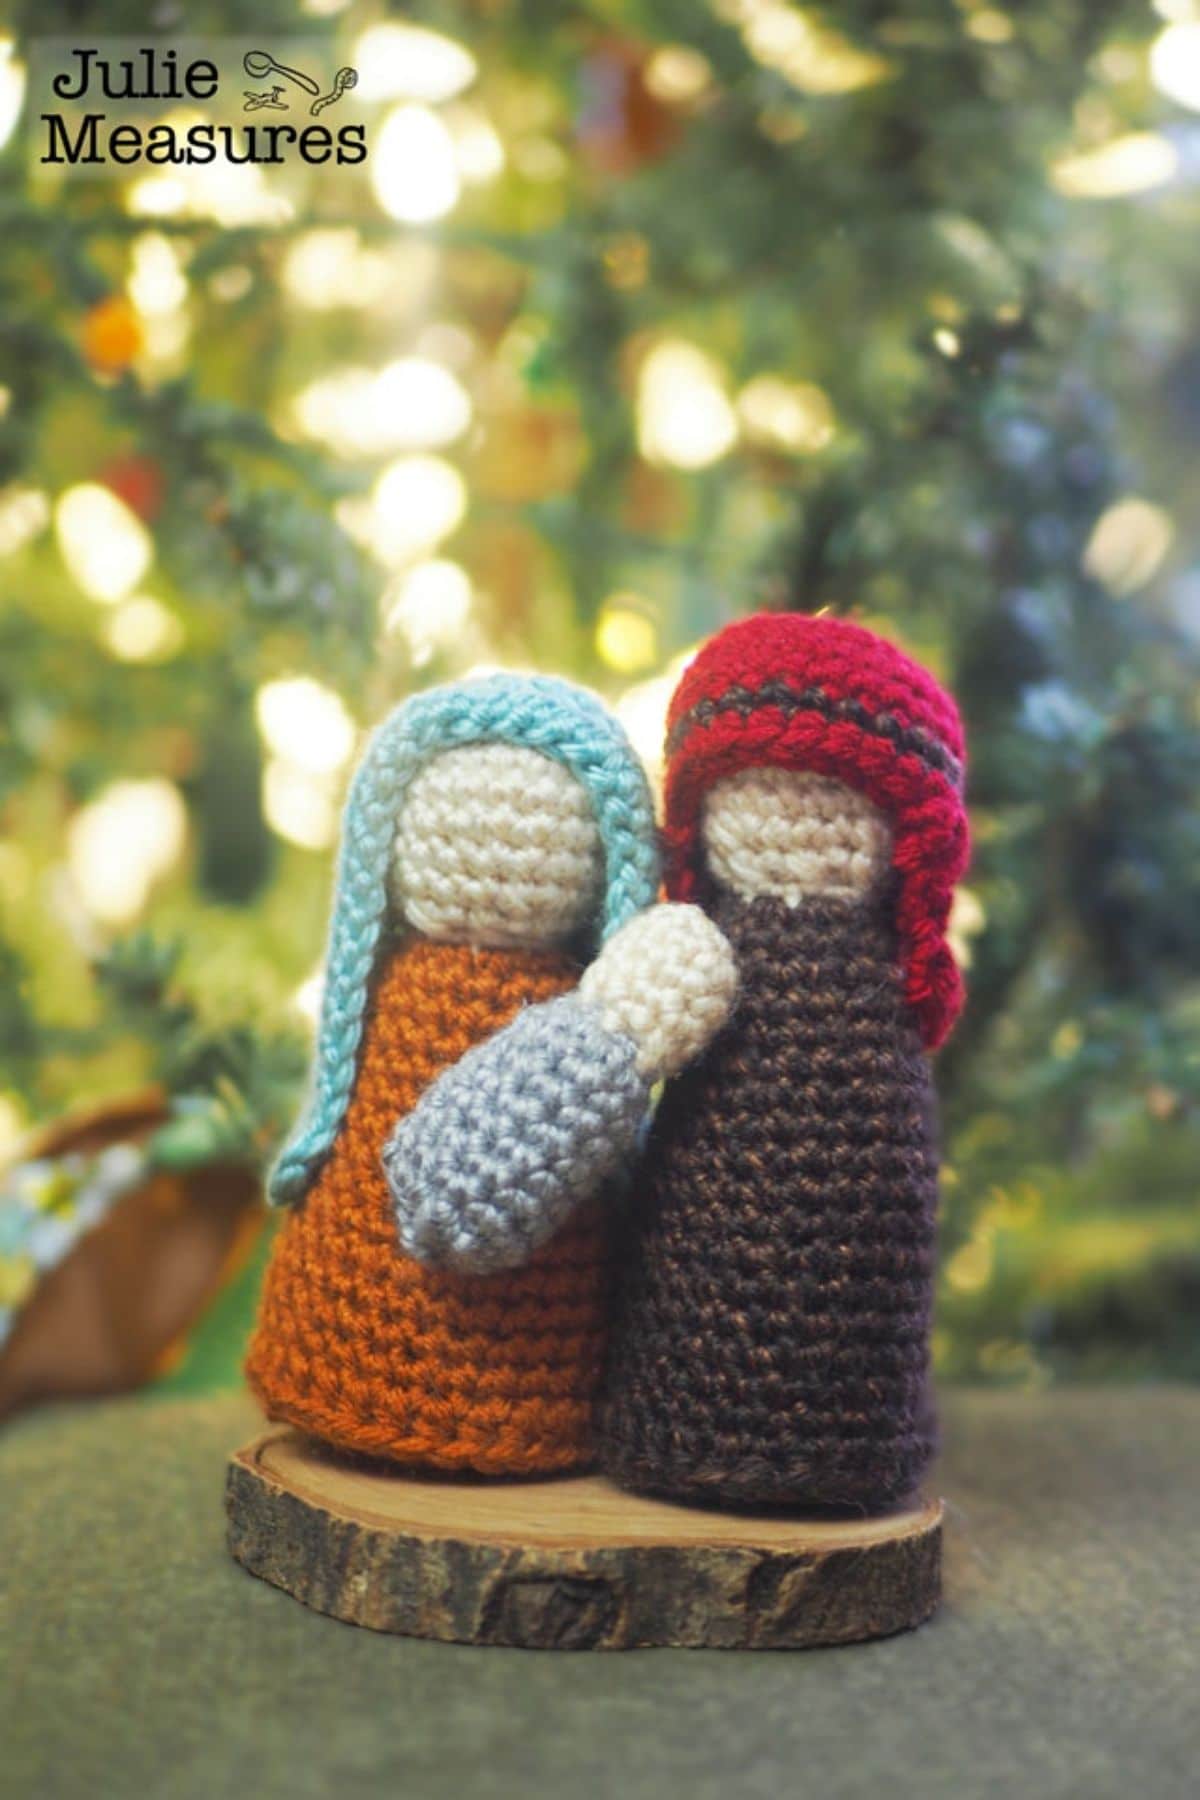 Faceless crochet Mary and Joseph standing on a small wooden log holding a small baby Jesus in their arms.